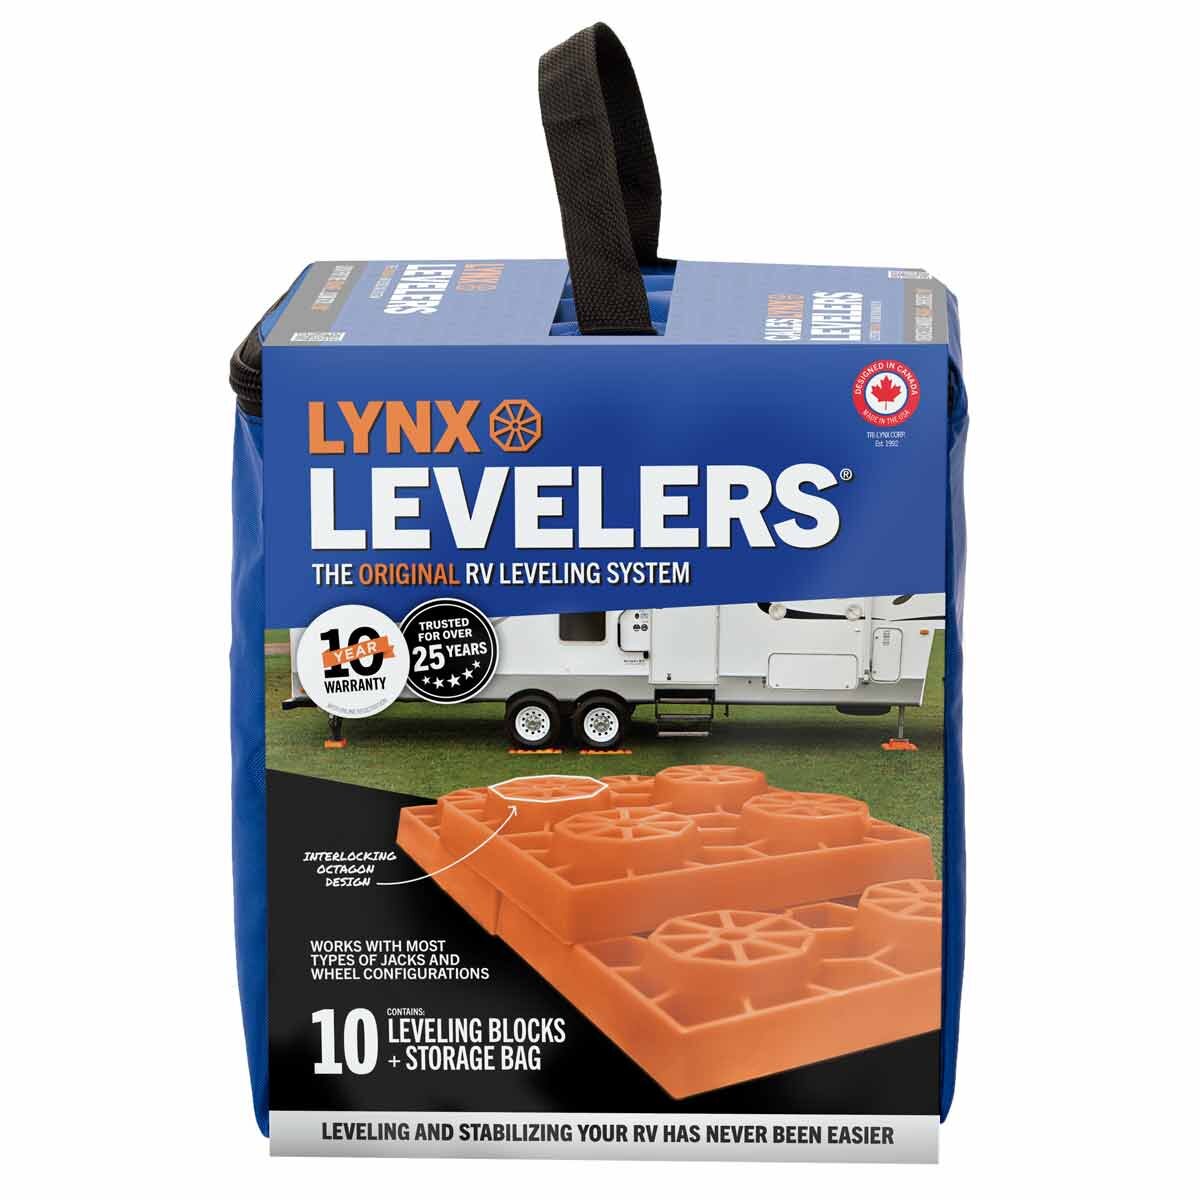 lynx-00015C-E_levelers_product-preview-1.jpg